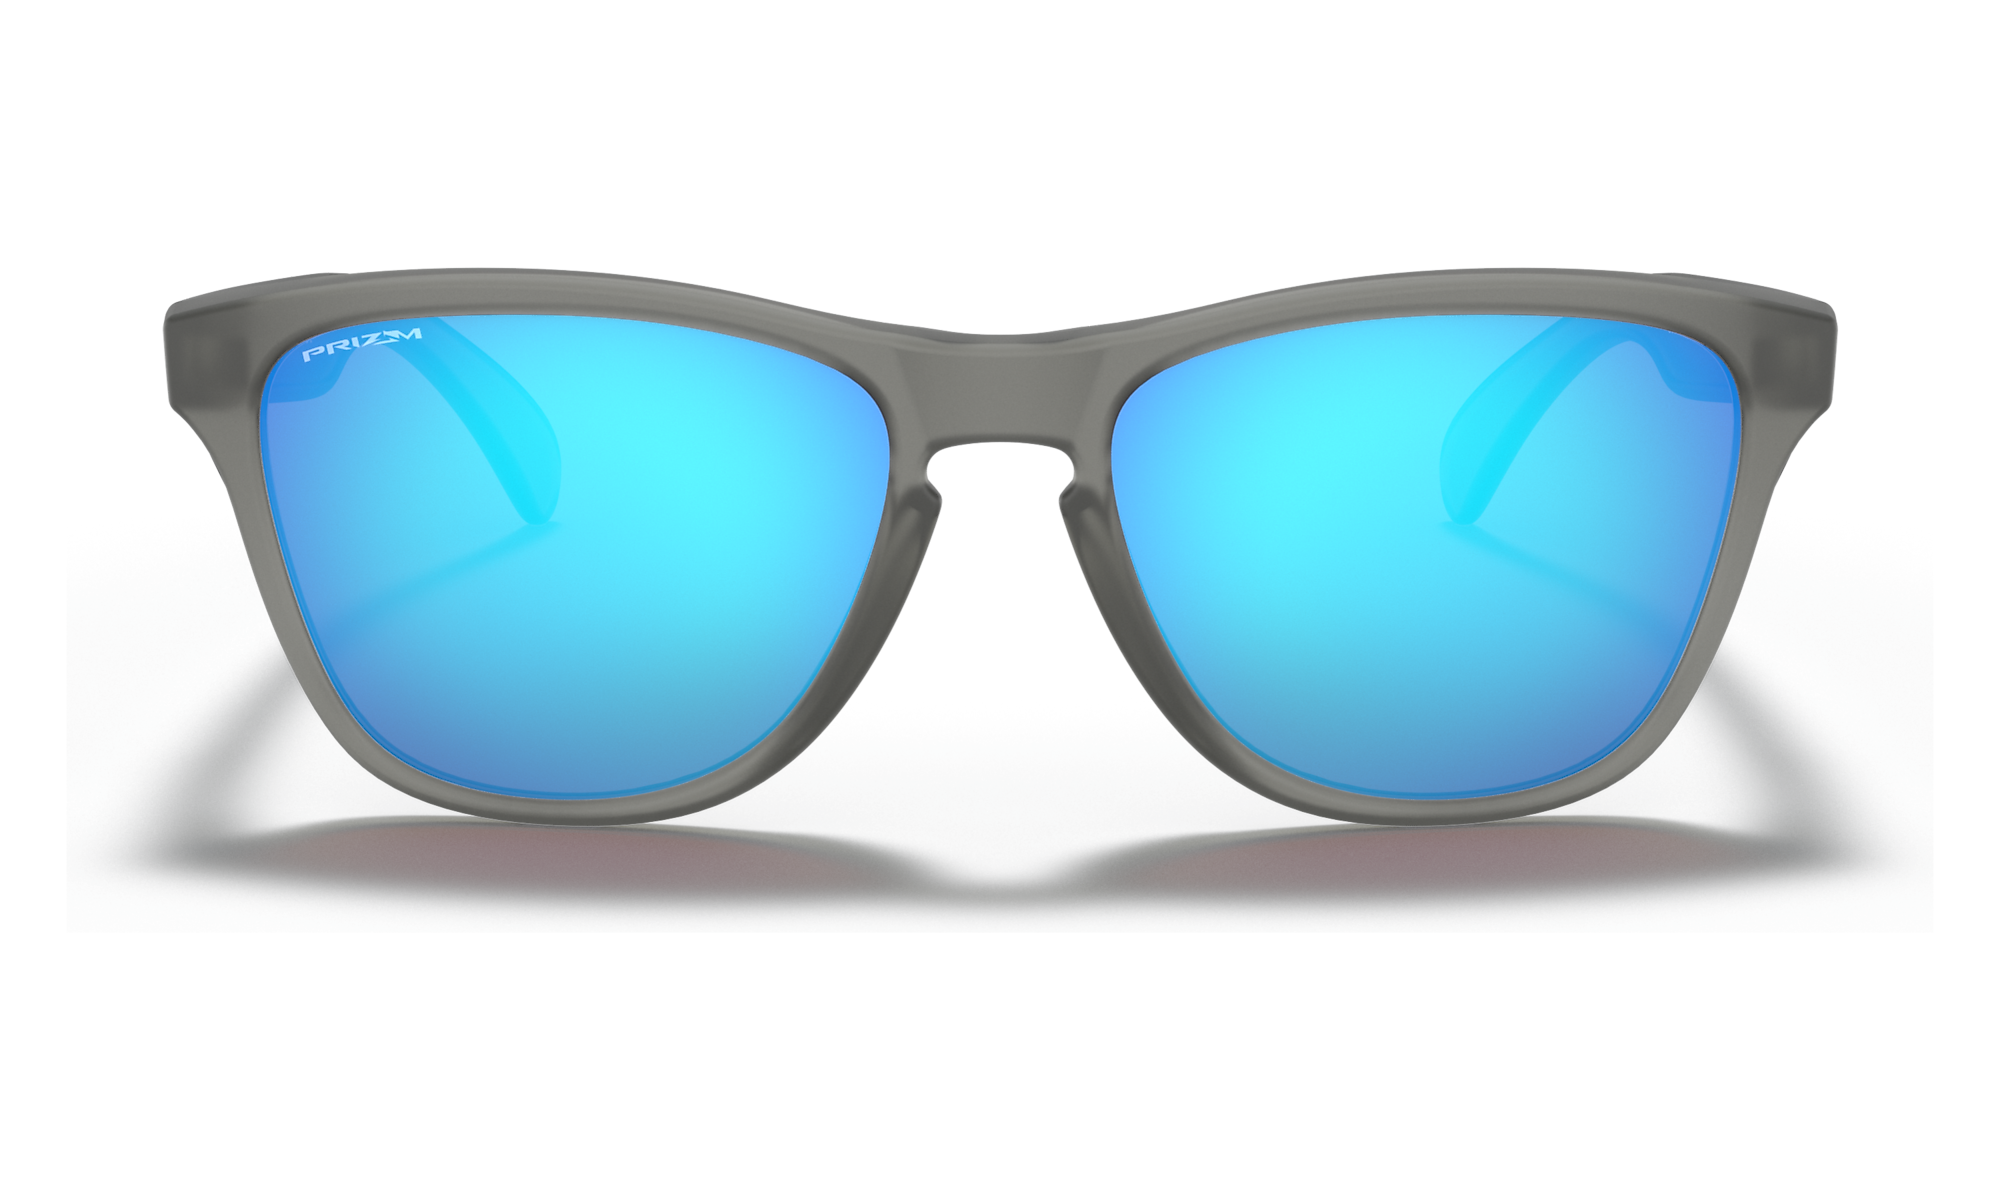 Frogskins XS (Youth Fit) Matte Grey Ink | PRIZM Sapphire | 9006-05